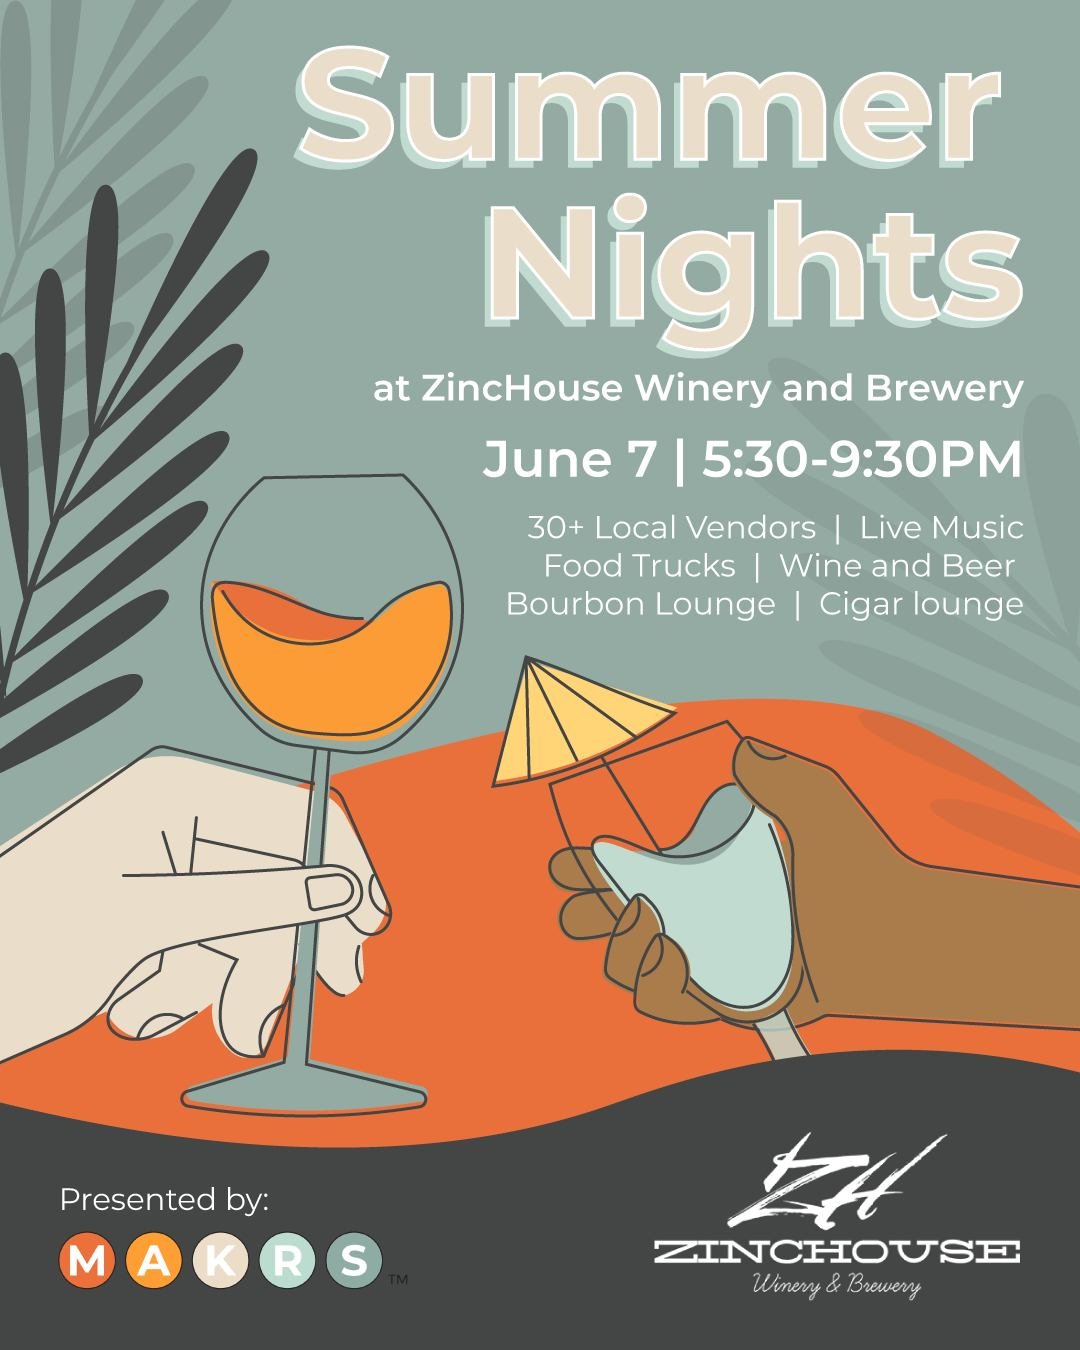 CALLING ALL WINE LOVERS! 🥂🍾

We're headed back to @zinchouse for our Summer Night market series!

This will be a 5-week night market series featuring 30+ local vendors, a mini food truck rodeo, live bands, wine, beer, and much more. 

If you haven'